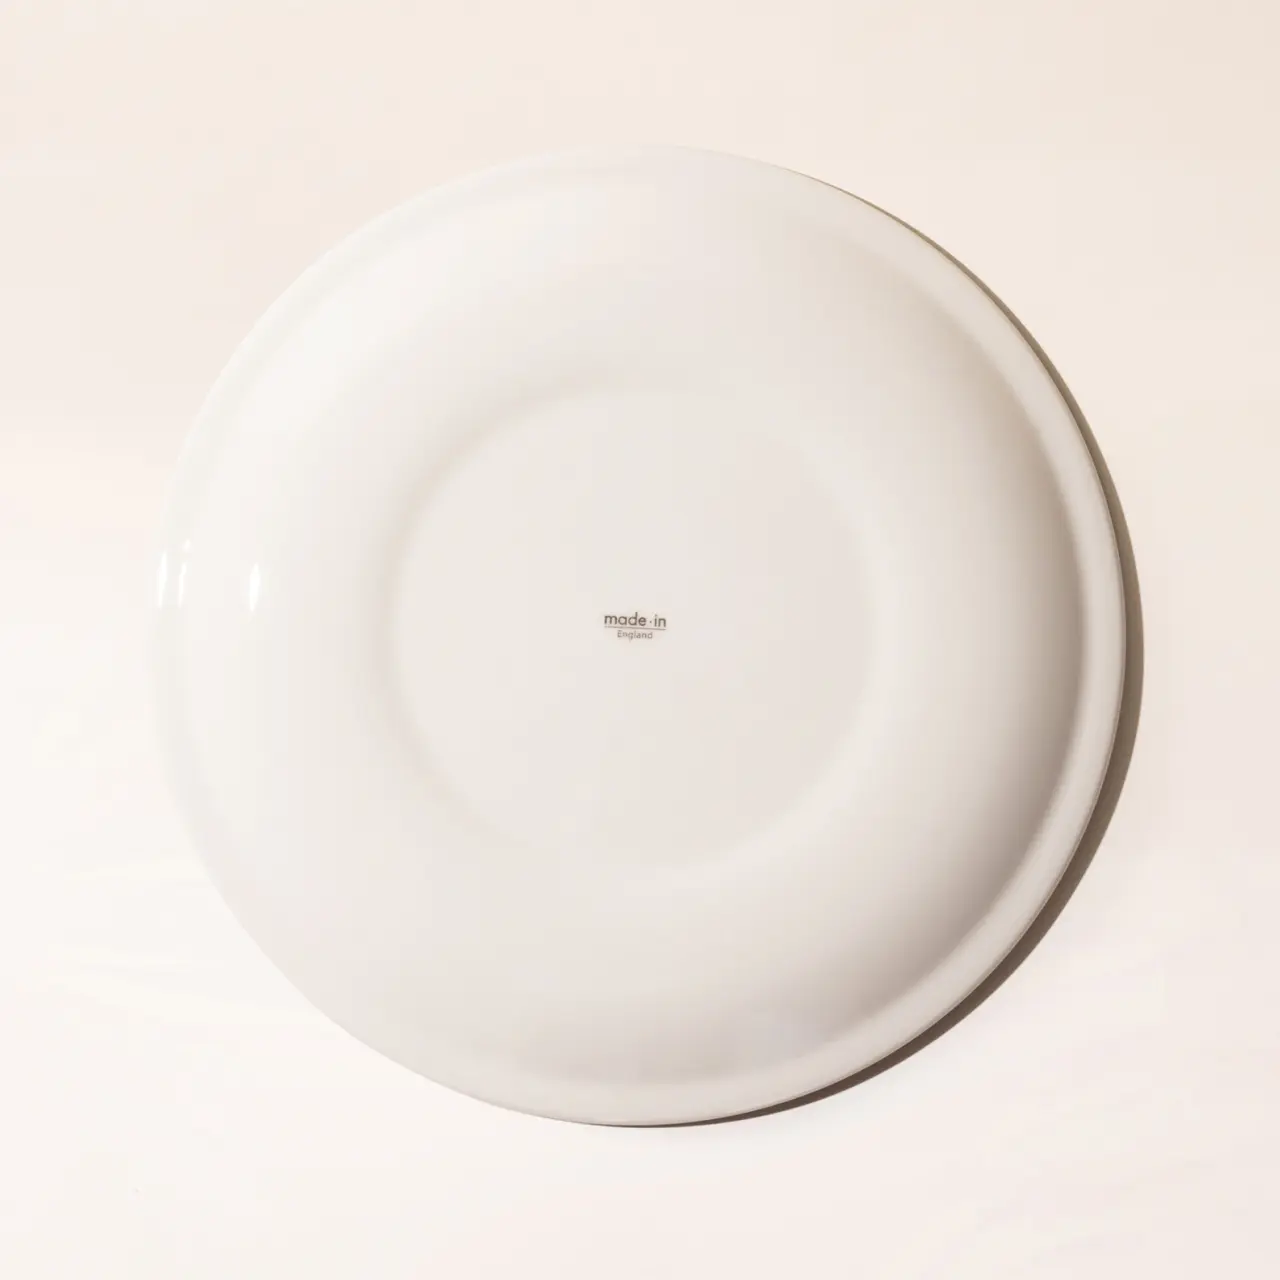 A plain white plate with a small "made in" text at the center on a light background.